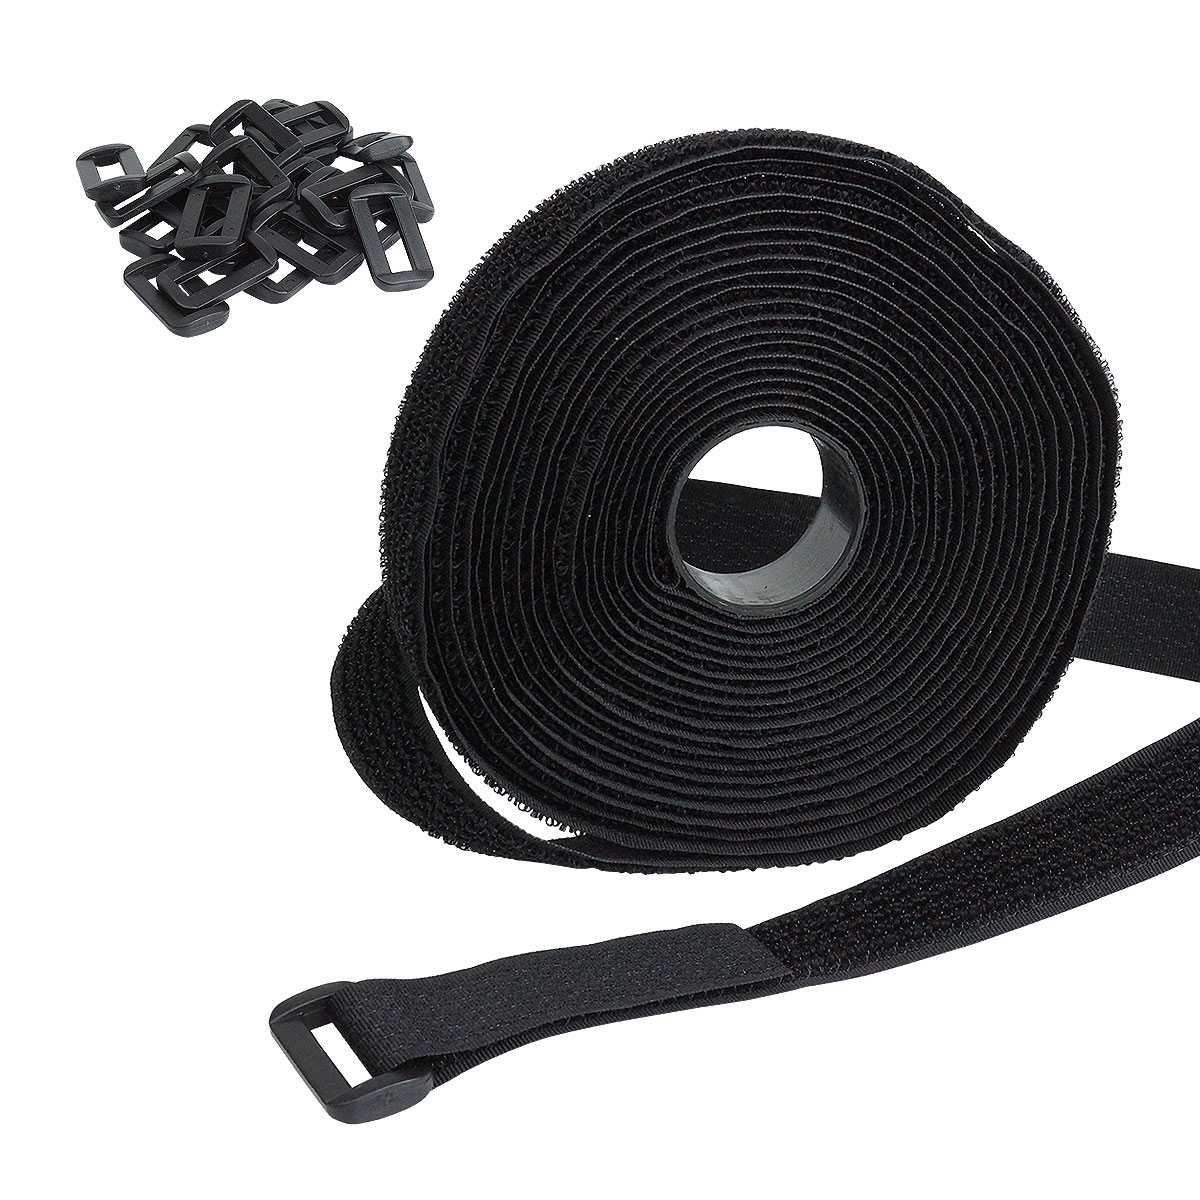  Magic clamping band Magic band cable band buckle attached length 5m buckle 25 piece cut possibility wiring adjustment integer . luggage small articles repetition 